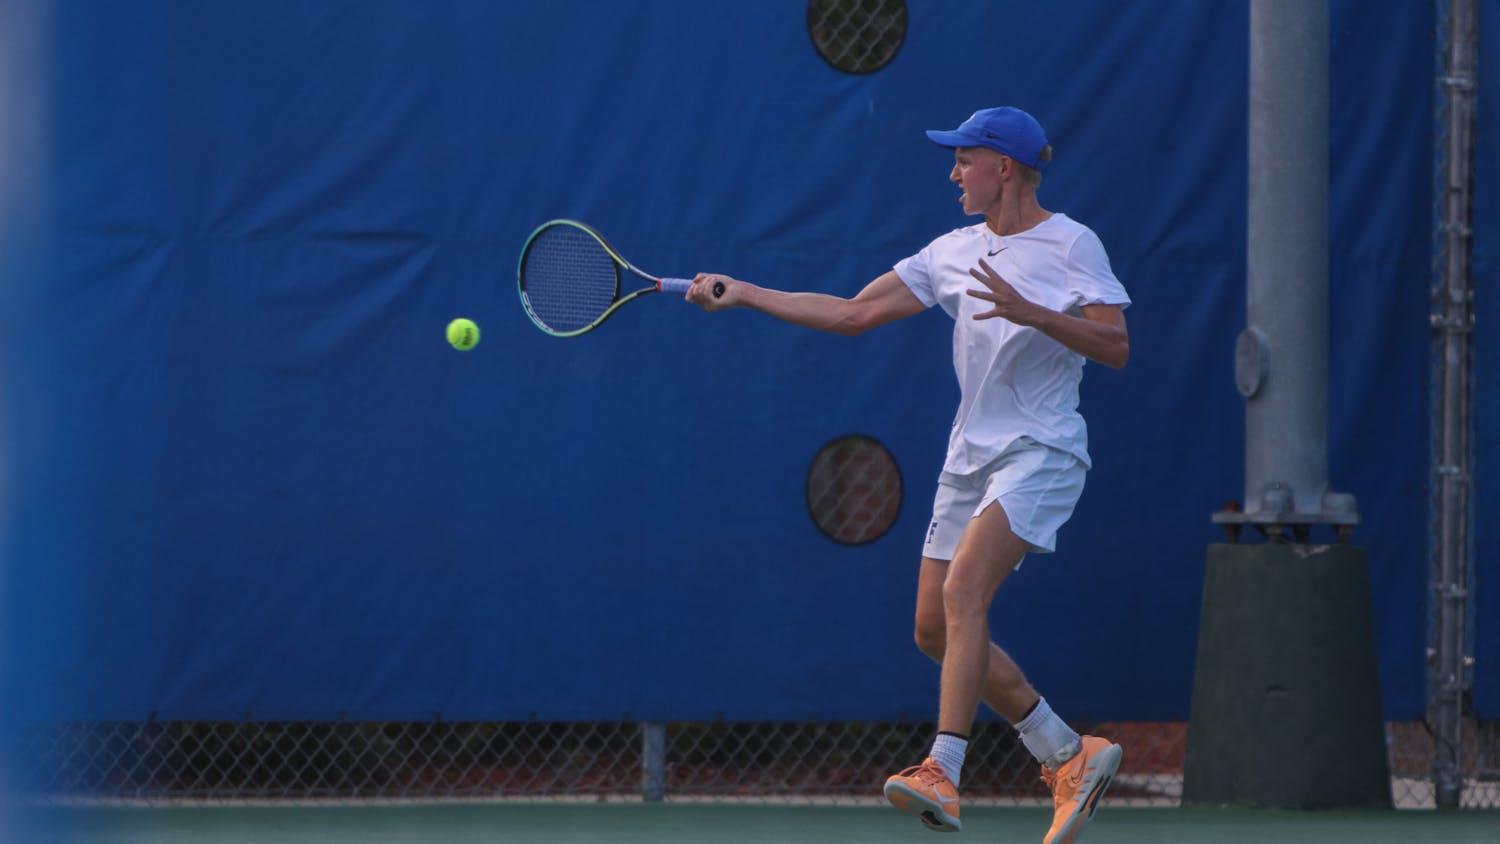 Florida senior Lukas Greif hits the ball with his racket during the Gators' 6-1 win over the Arkansas Razorbacks Friday, March 24, 2023.